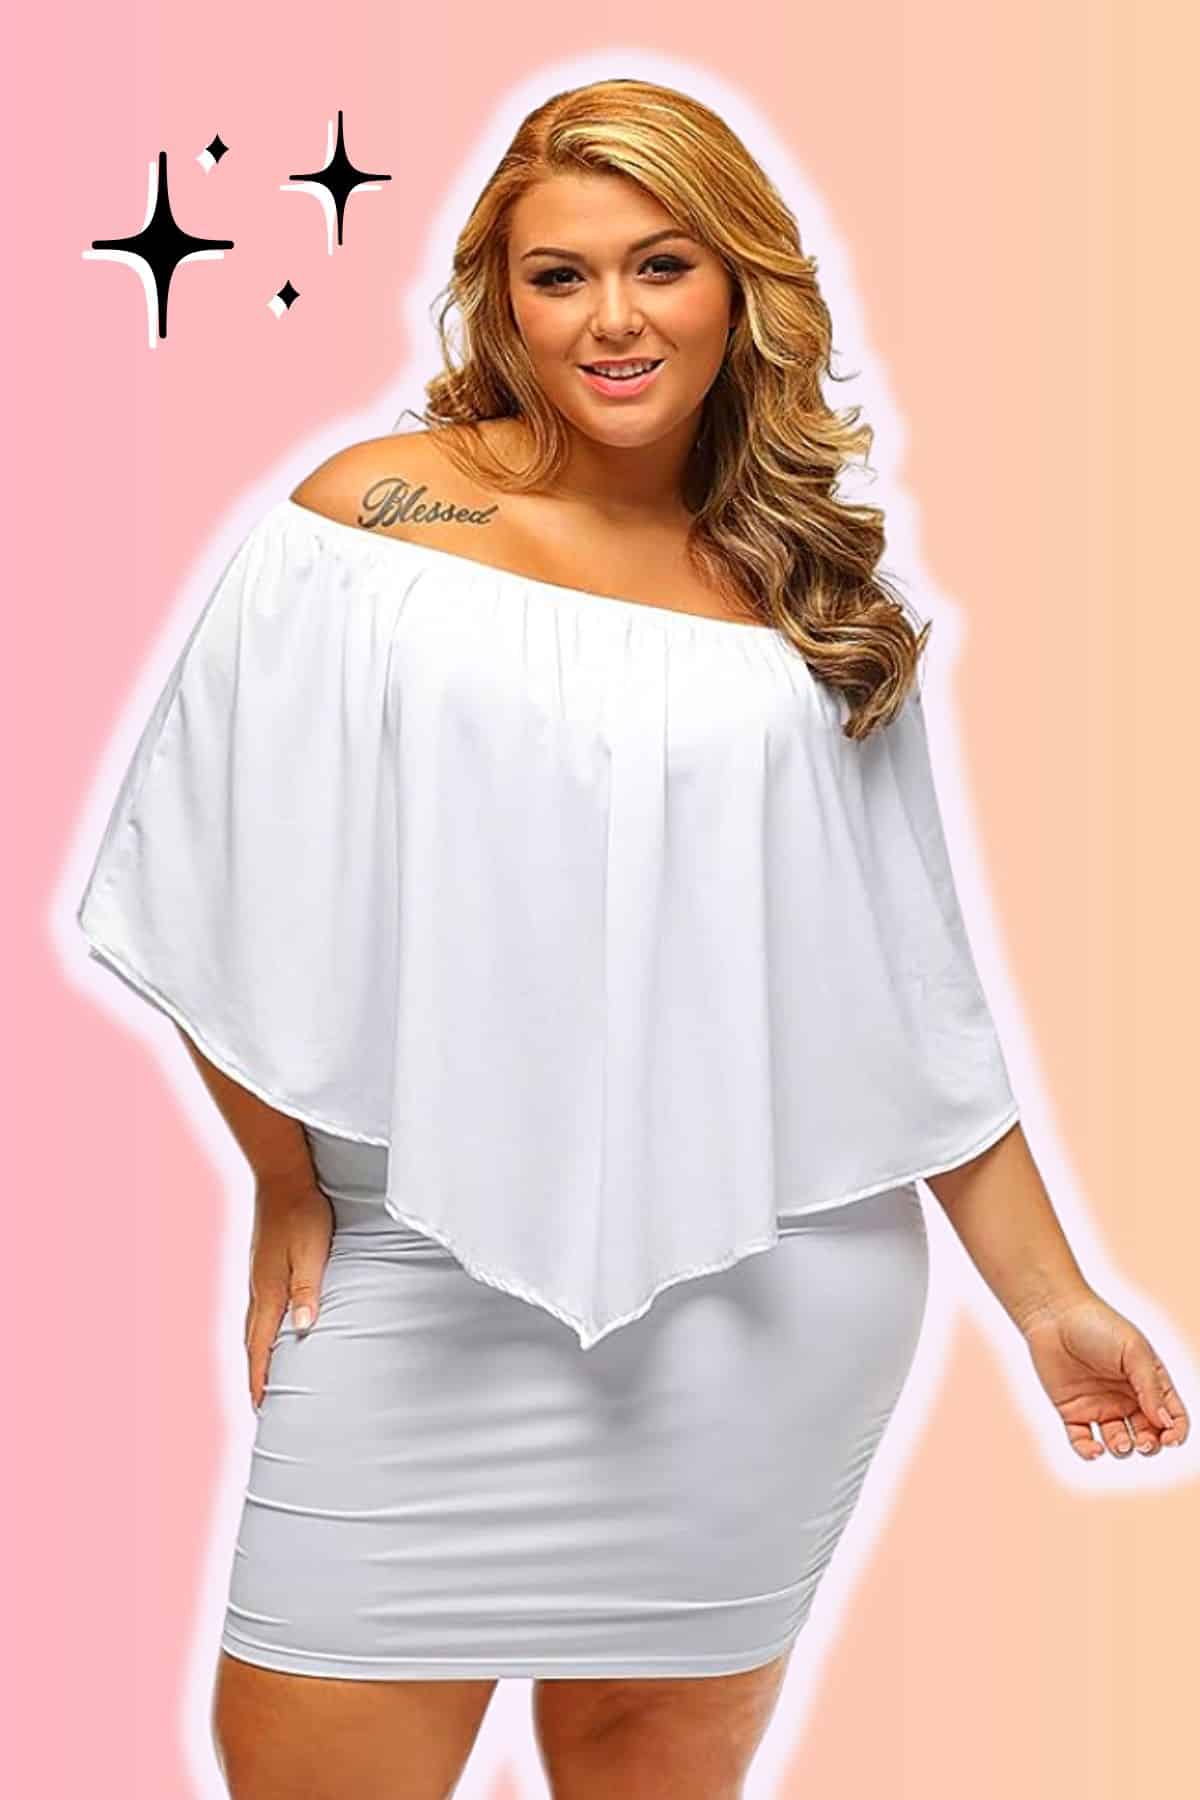 2024*11 Plus size all-white party outfits (slimming styling hacks